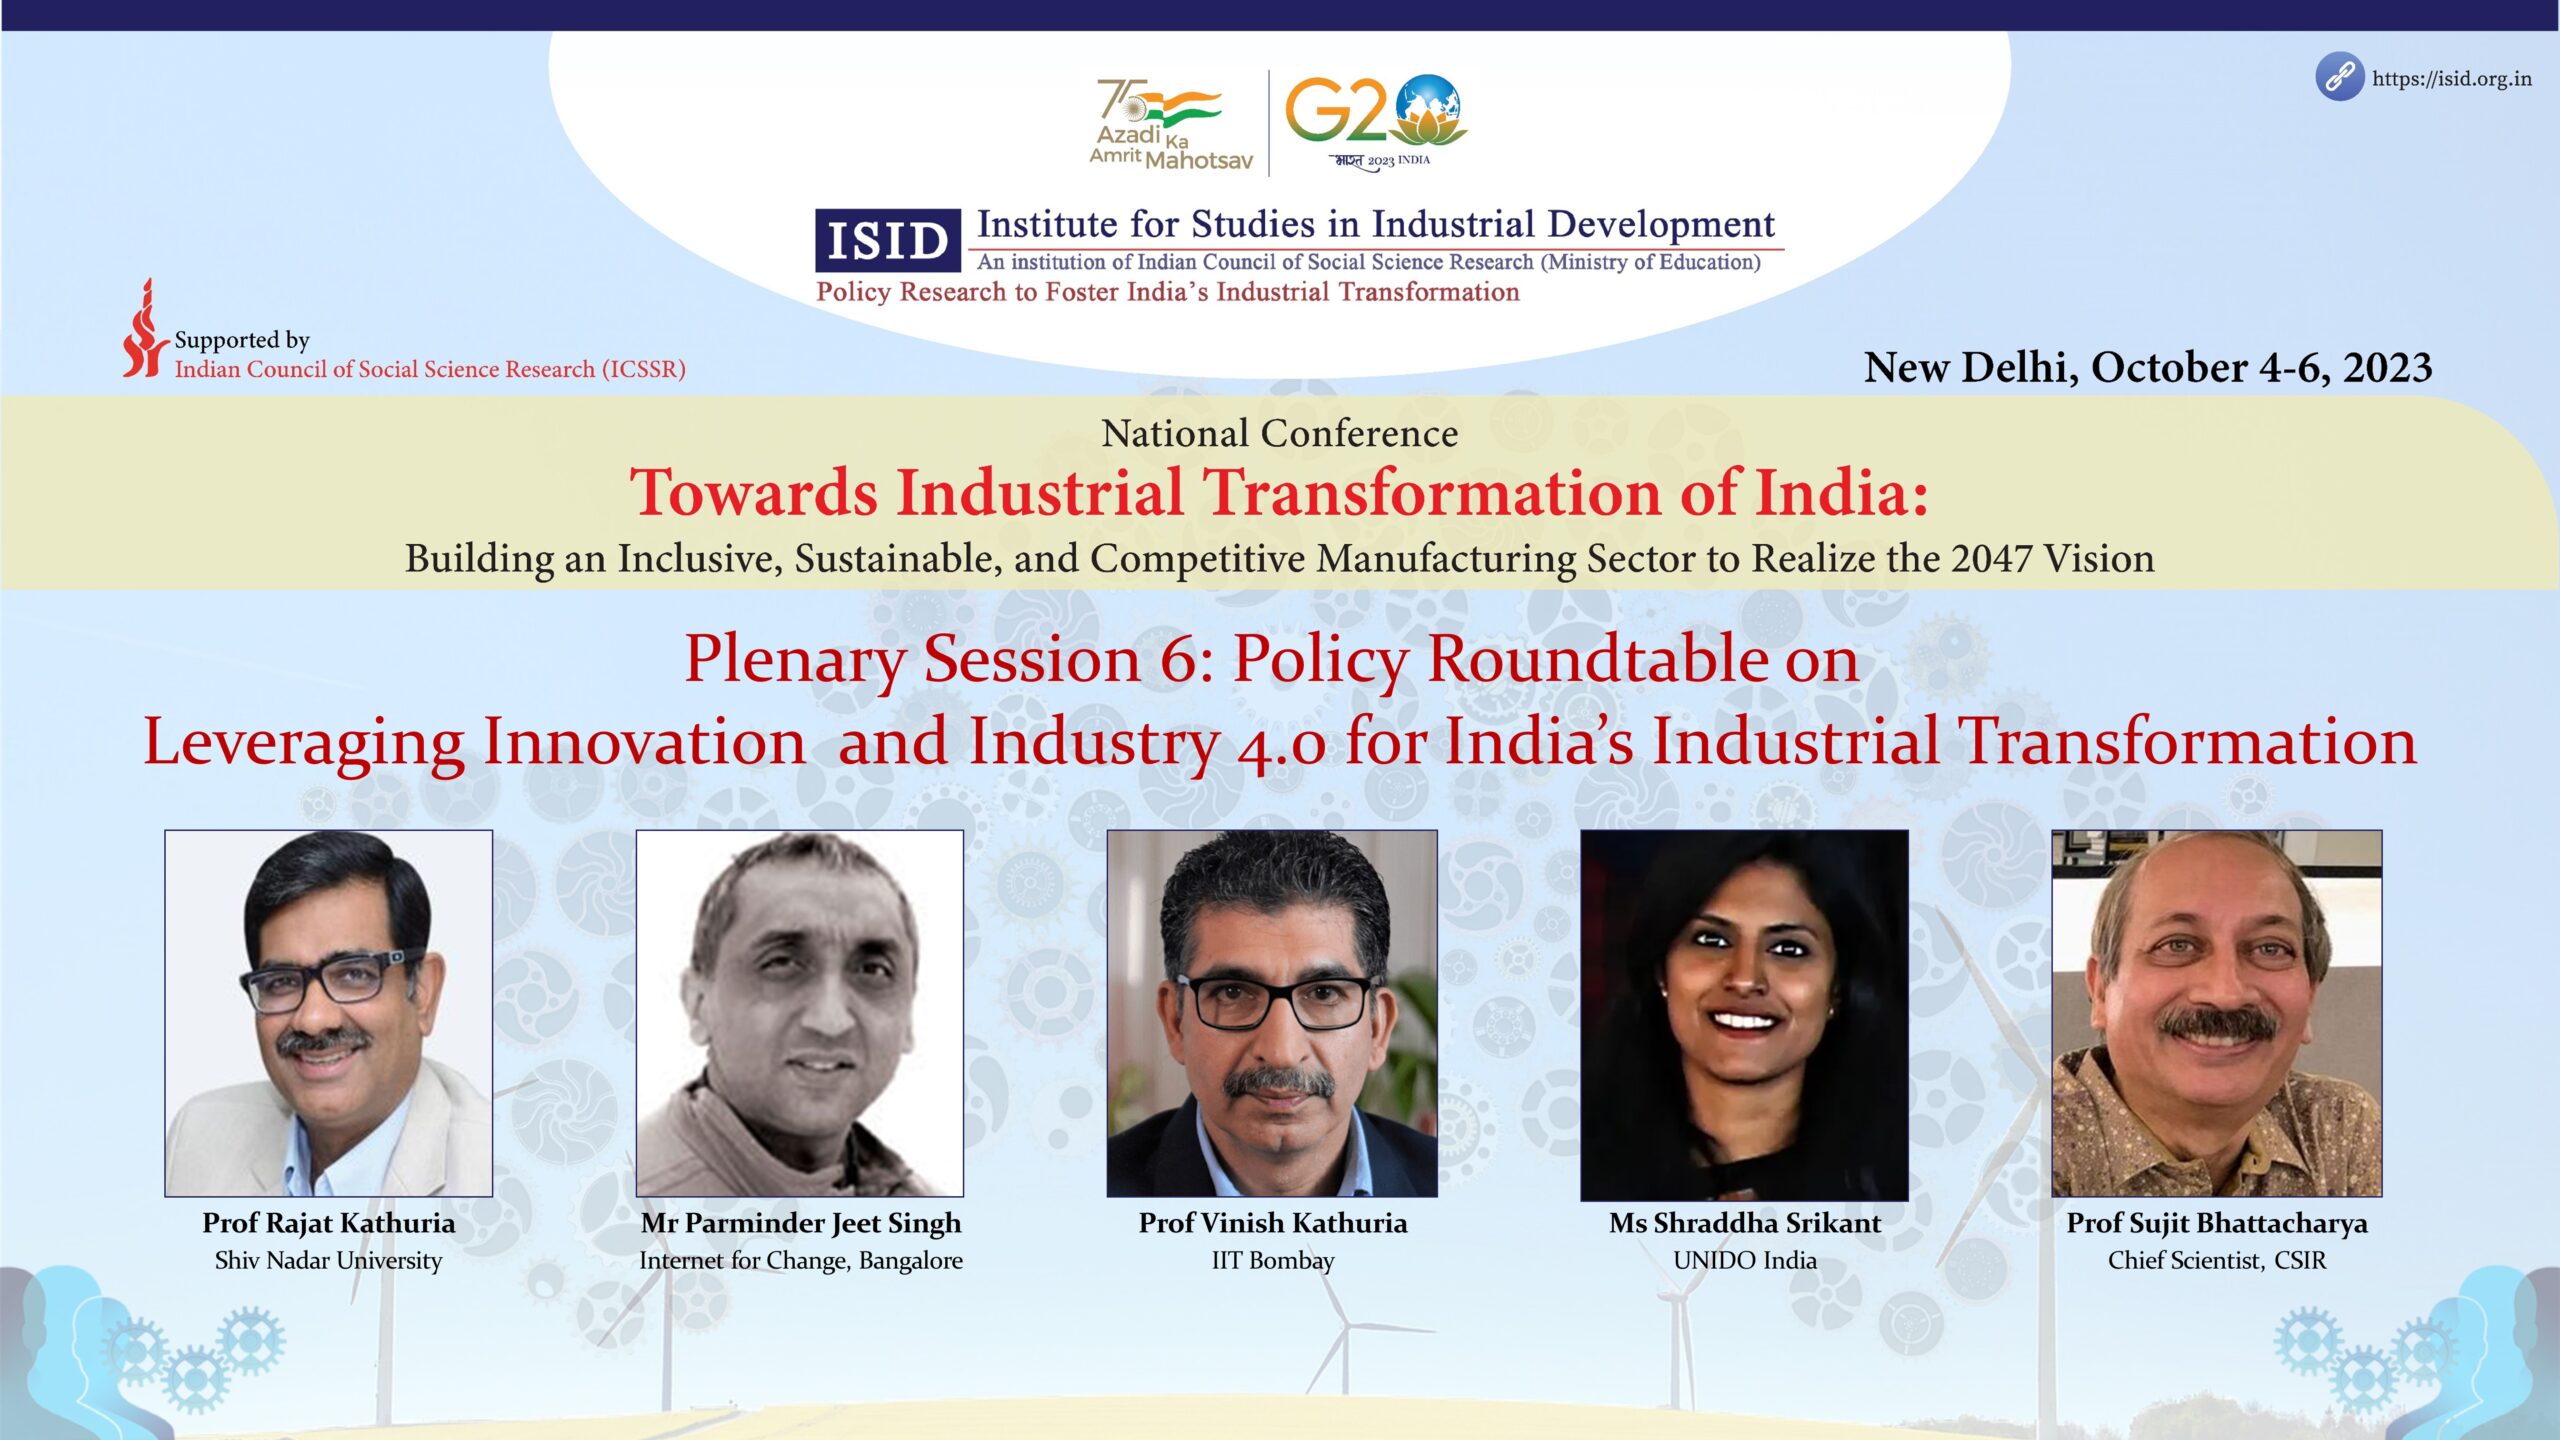 Plenary session 6: Policy Roundtable on Leveraging Innovation and Industry 4.0 for India’s Industrial Transformation